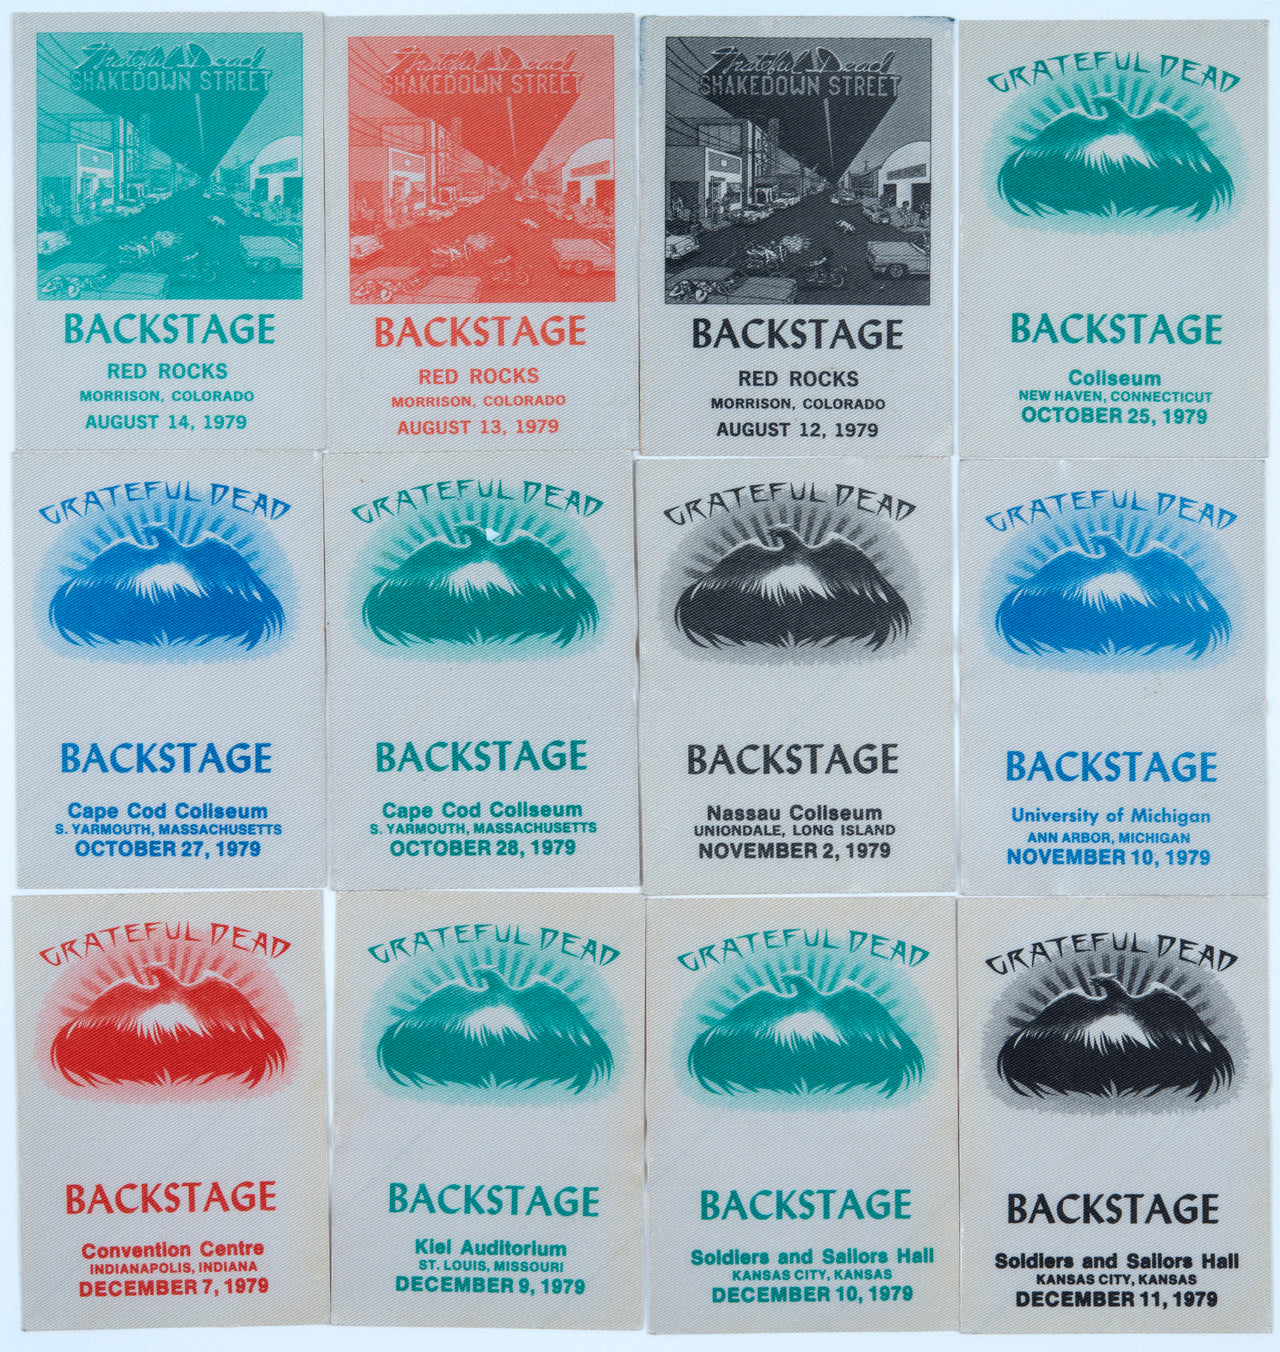 Grateful Dead Backstage Passes (8/14/1979 - 12/11/1979) from Dan Healy